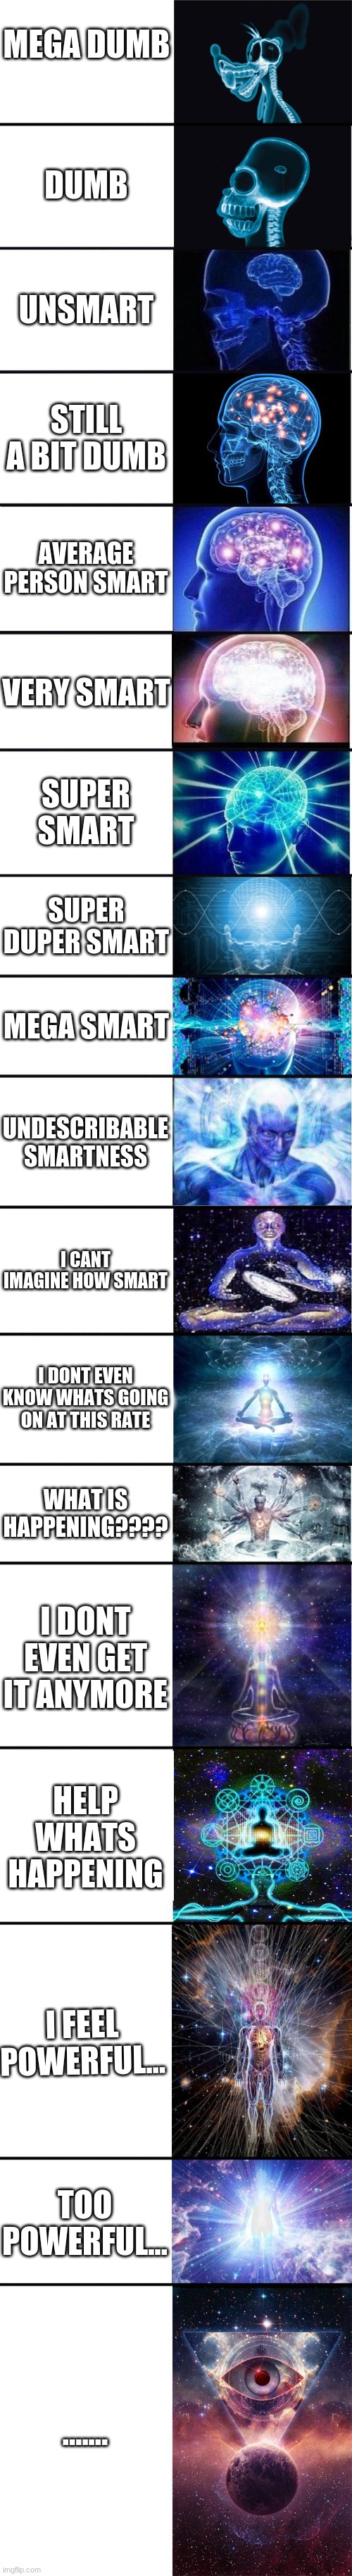 expanding brain: 9001 | MEGA DUMB; DUMB; UNSMART; STILL A BIT DUMB; AVERAGE PERSON SMART; VERY SMART; SUPER SMART; SUPER DUPER SMART; MEGA SMART; UNDESCRIBABLE SMARTNESS; I CANT IMAGINE HOW SMART; I DONT EVEN KNOW WHATS GOING ON AT THIS RATE; WHAT IS HAPPENING???? I DONT EVEN GET IT ANYMORE; HELP WHATS HAPPENING; I FEEL POWERFUL... TOO POWERFUL... ....... | image tagged in expanding brain 9001 | made w/ Imgflip meme maker